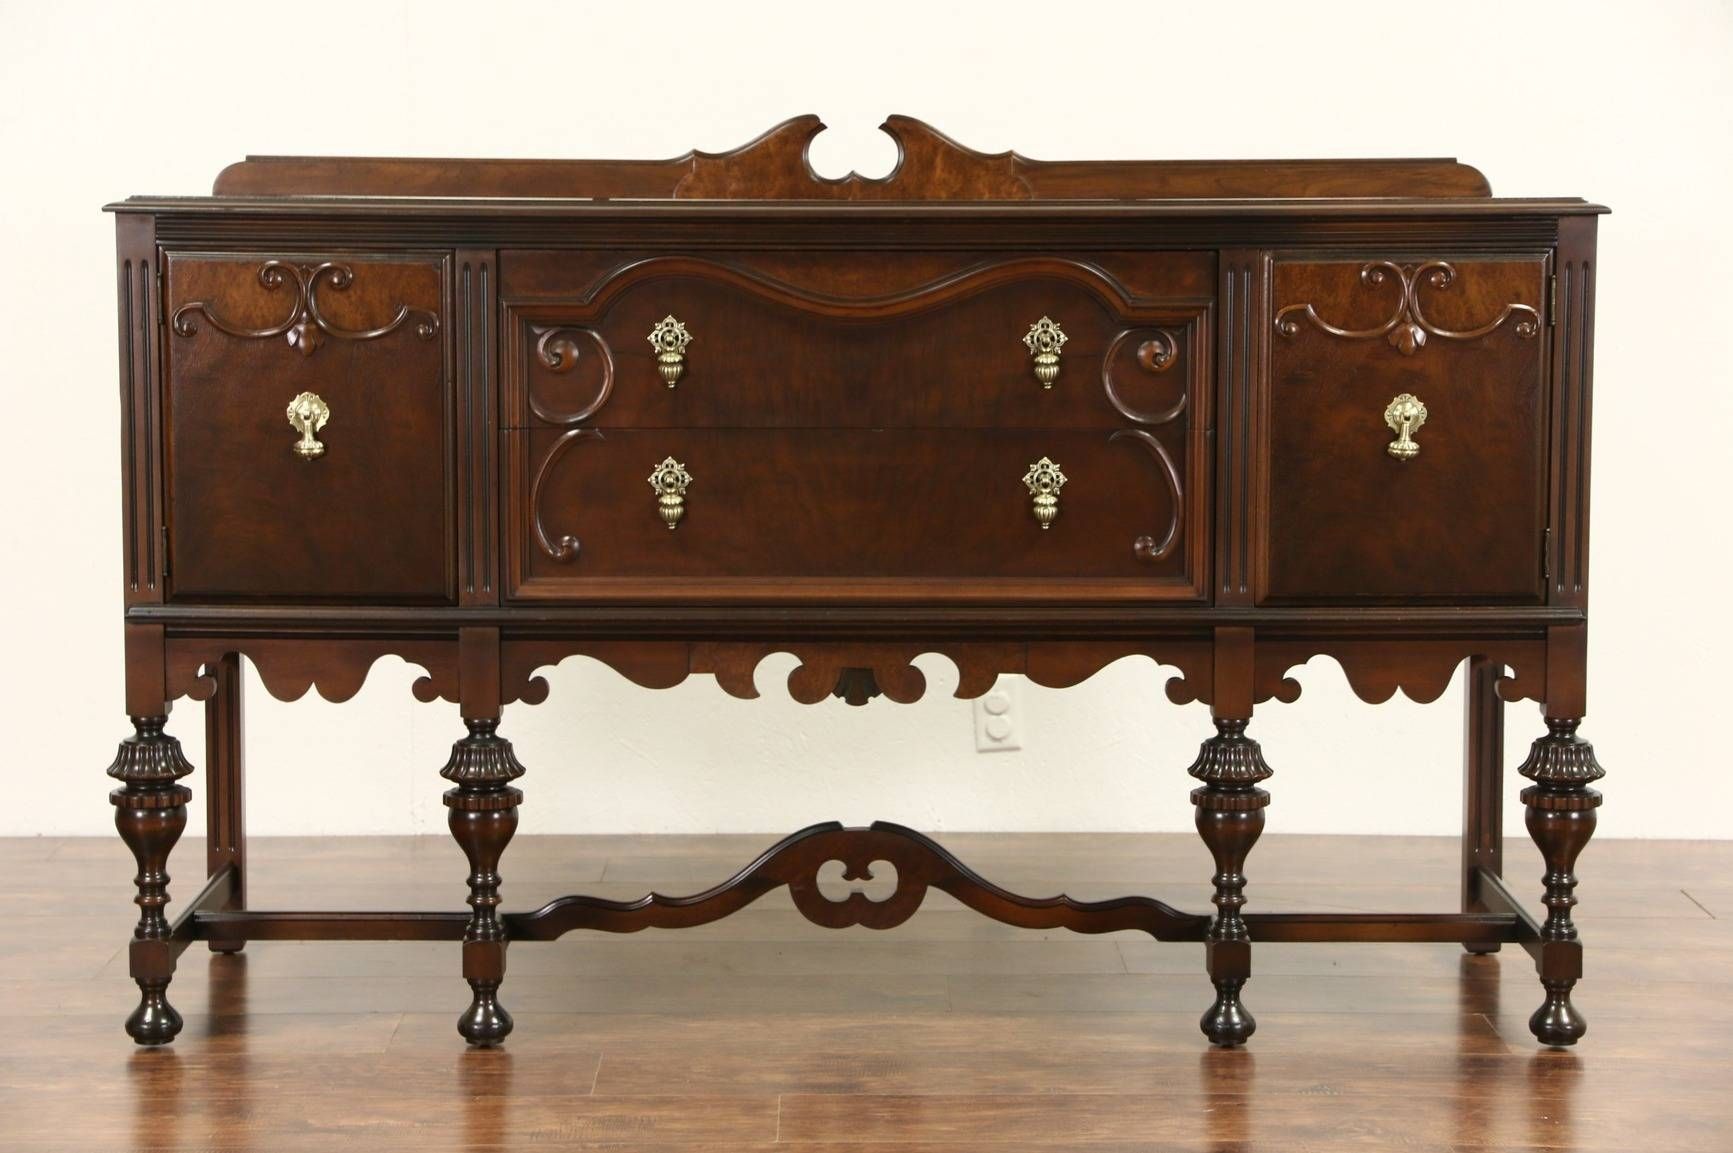 Sold – English Tudor 1920 Antique Walnut Sideboard Server Or Pertaining To Antique Sideboard Buffets (View 8 of 15)